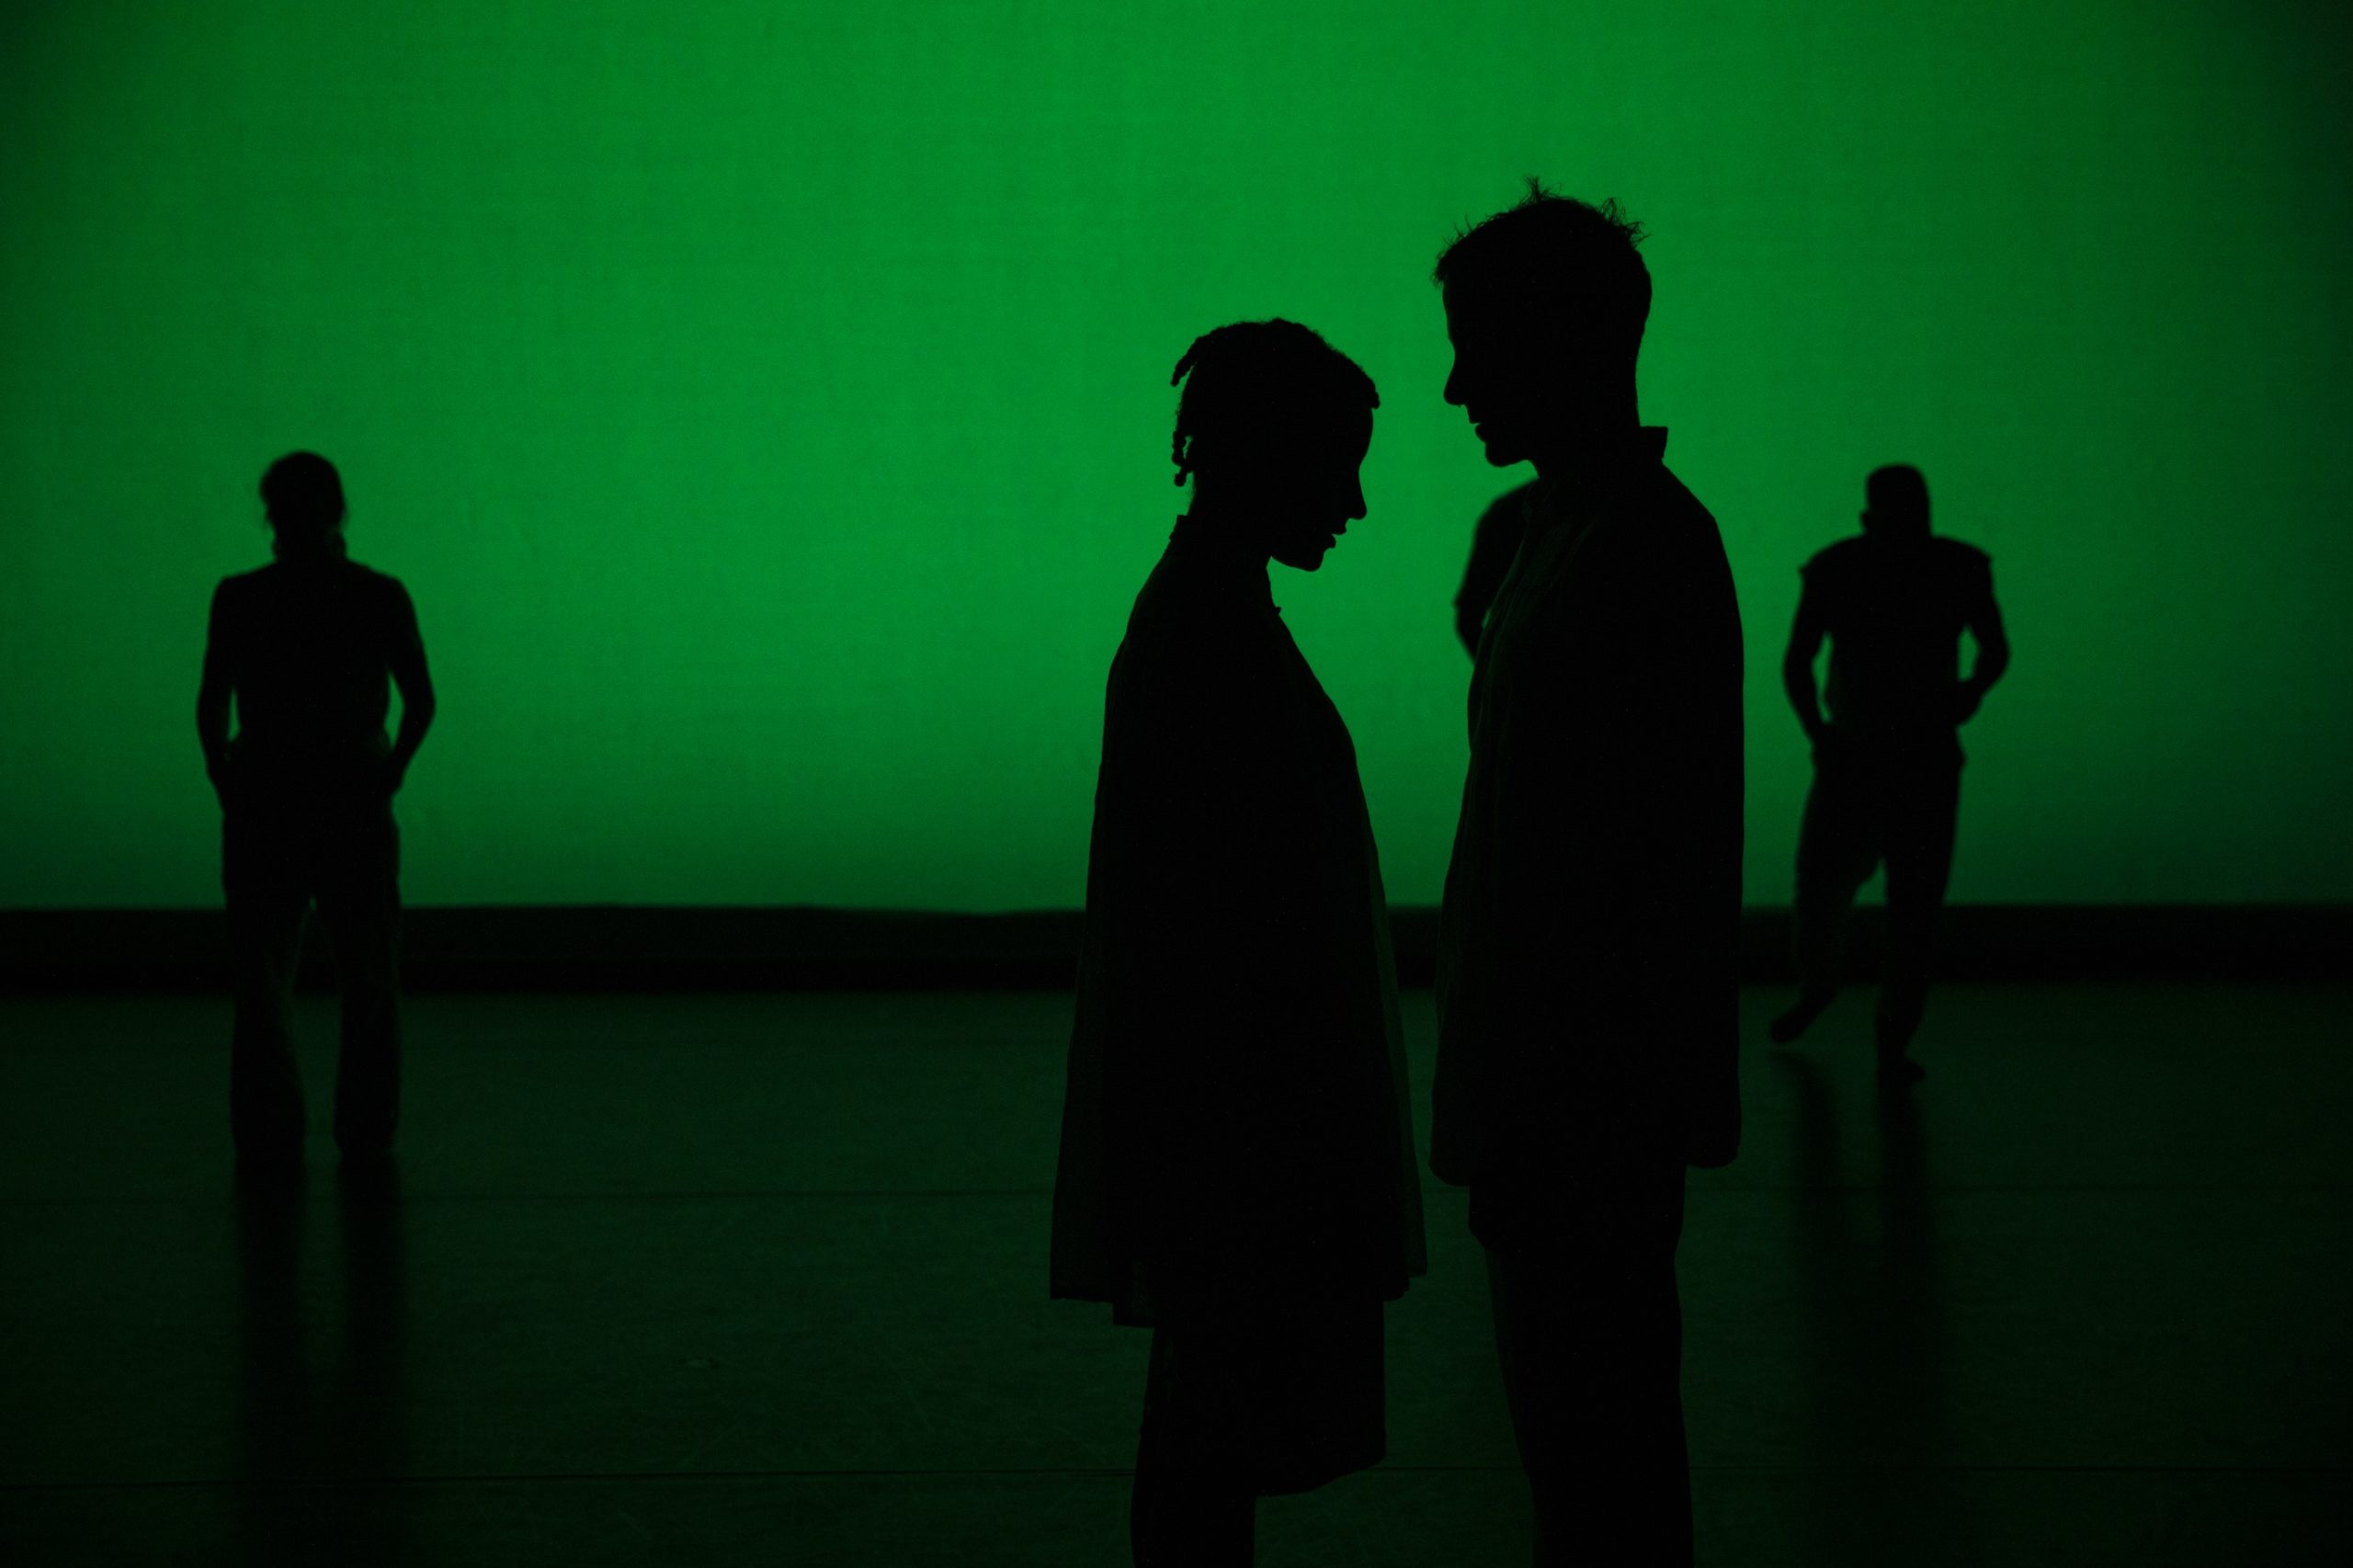 Four dancers - Kellie Ann Lynch, Myssi Robinson, Doug Gillespie, Jared Brown - silhouetted in green light stand in the frame. Two dancers, one furthest left and the other furthest right face the audience with heads tilted down. Two dancers in the center frame stand close together, facing each other in an inward moment.